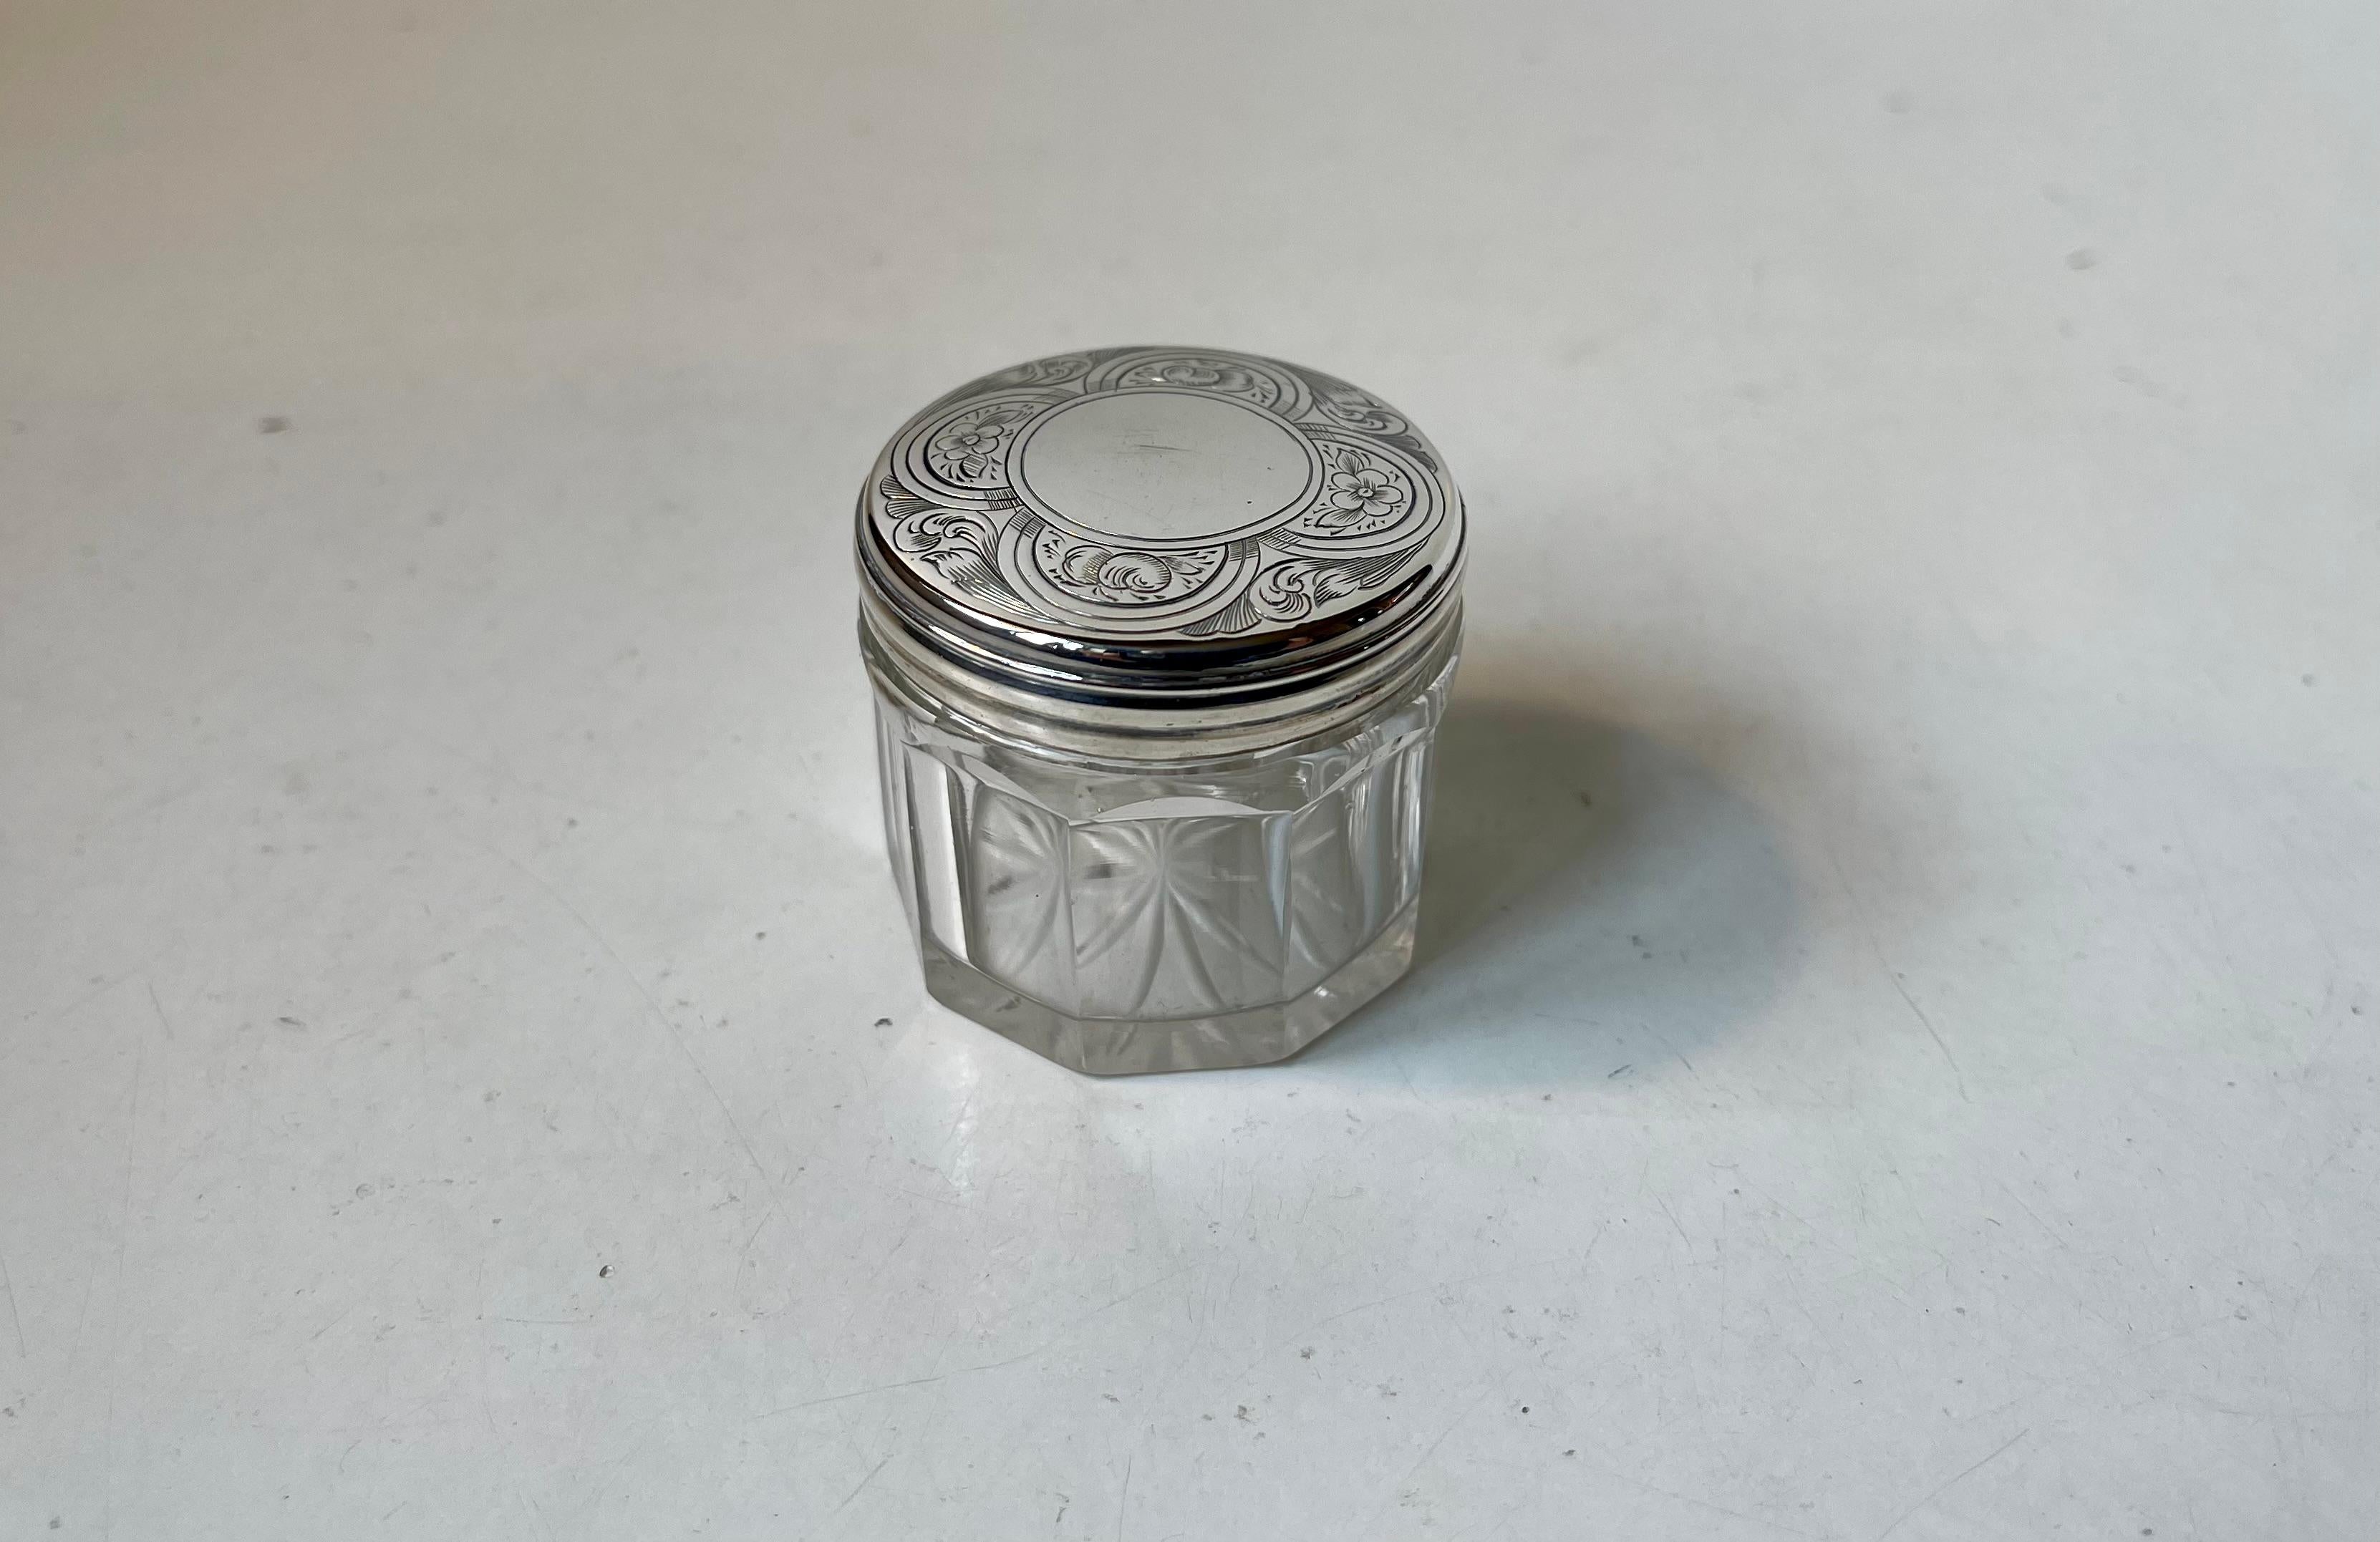 Small decorative jar, box or trinket for vanity smalls. Its executed in faceted crystal and has a silver hand-engraved lid. London Hallmarks for Thomas Wallis, Lion for solid silver and a small t for the year 1834. Measurements: D: 4 cm, H: 3.5 cm.